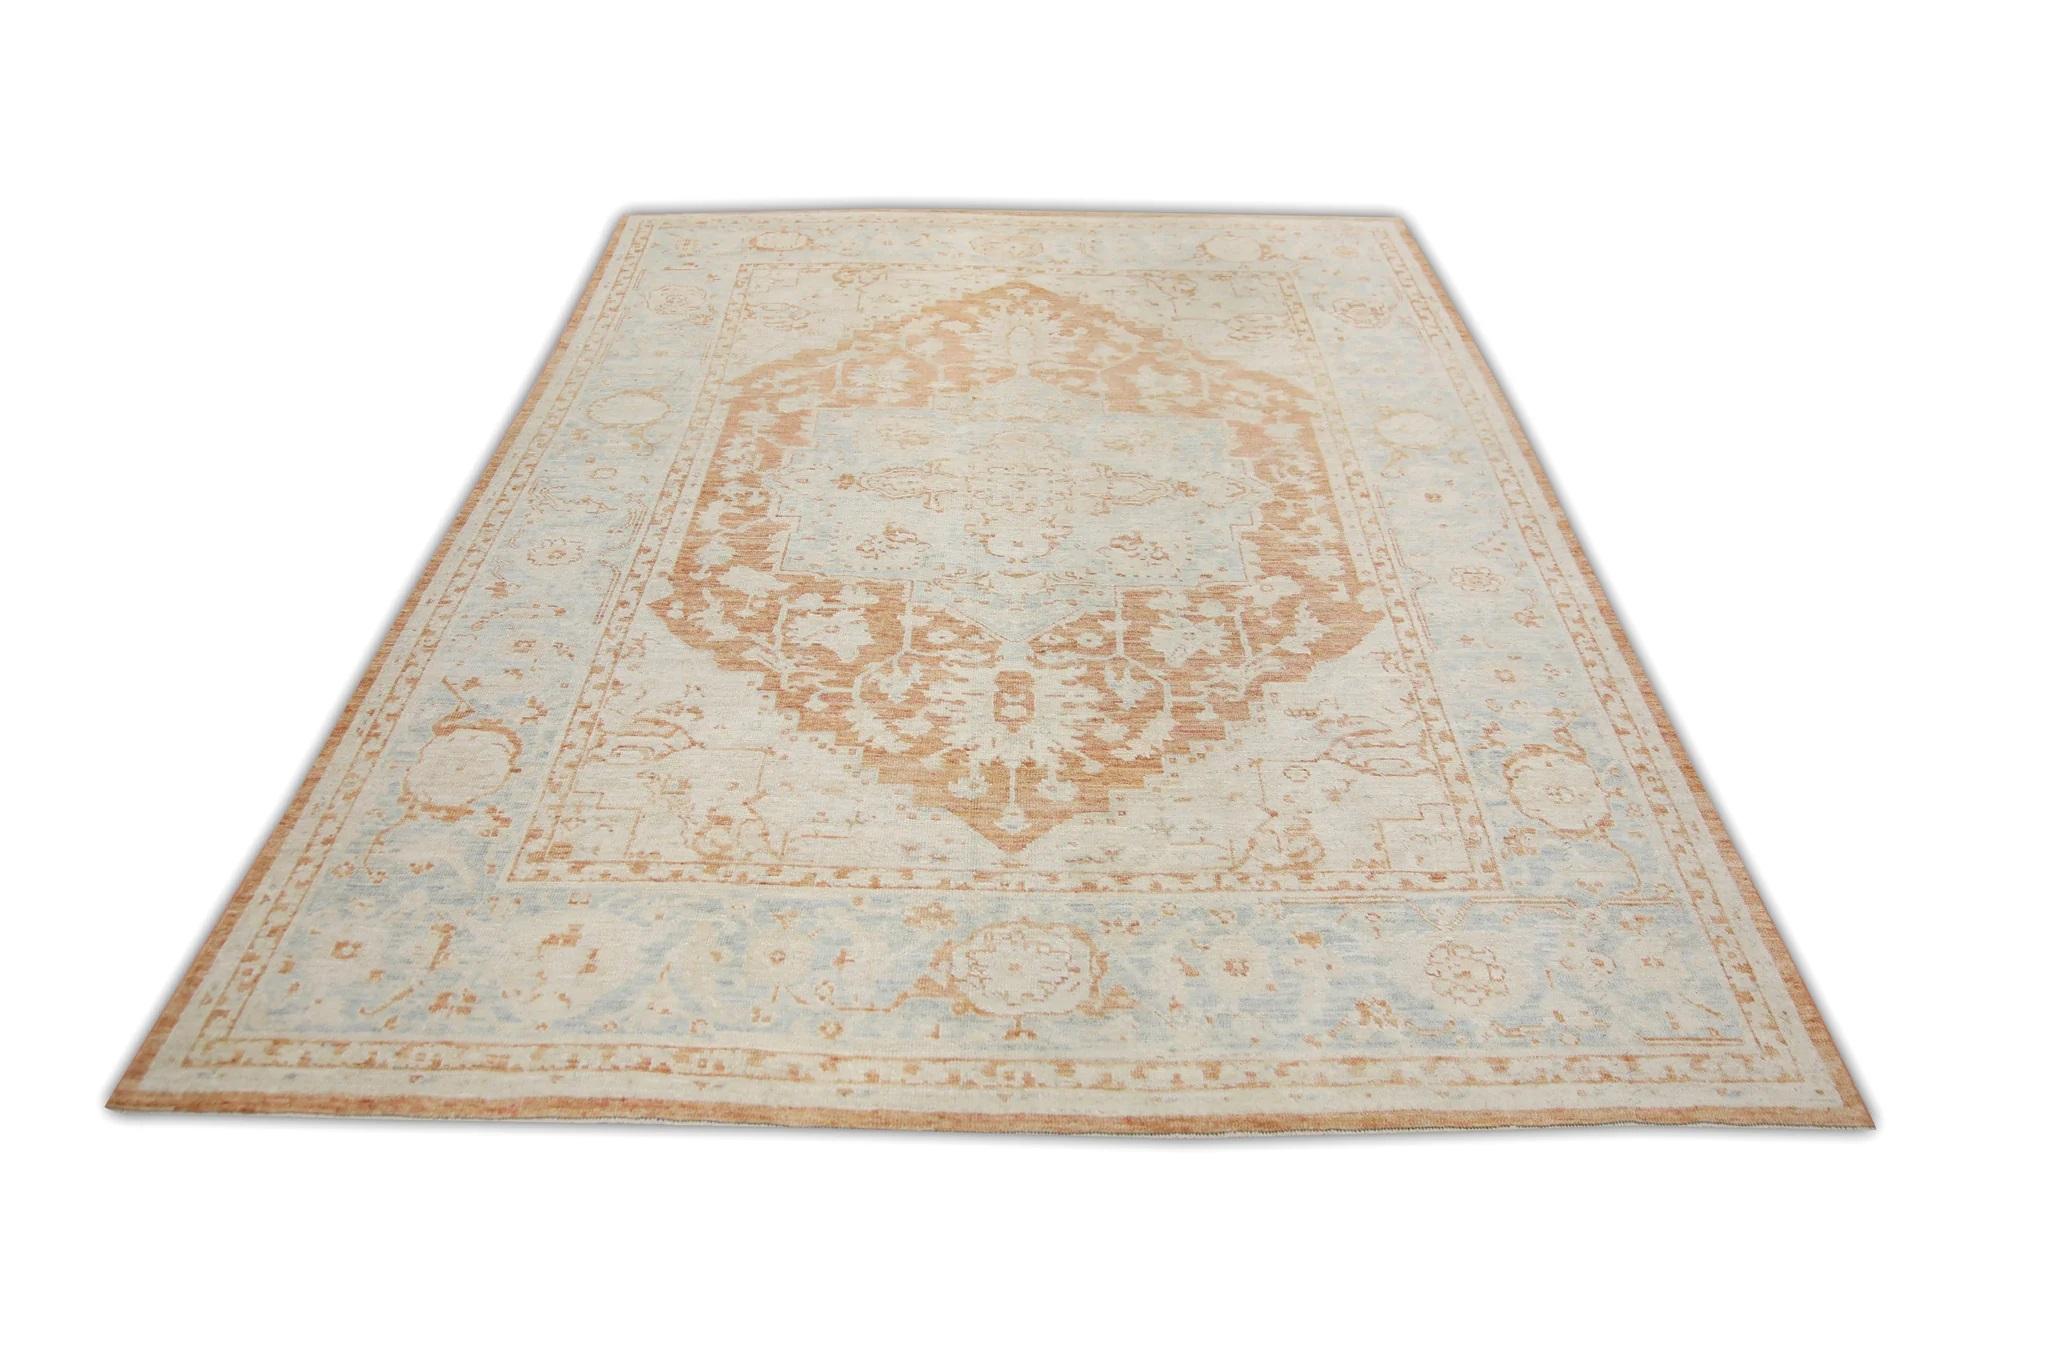 Floral Handwoven Wool Turkish Oushak Rug in Blue and Rust 5'11